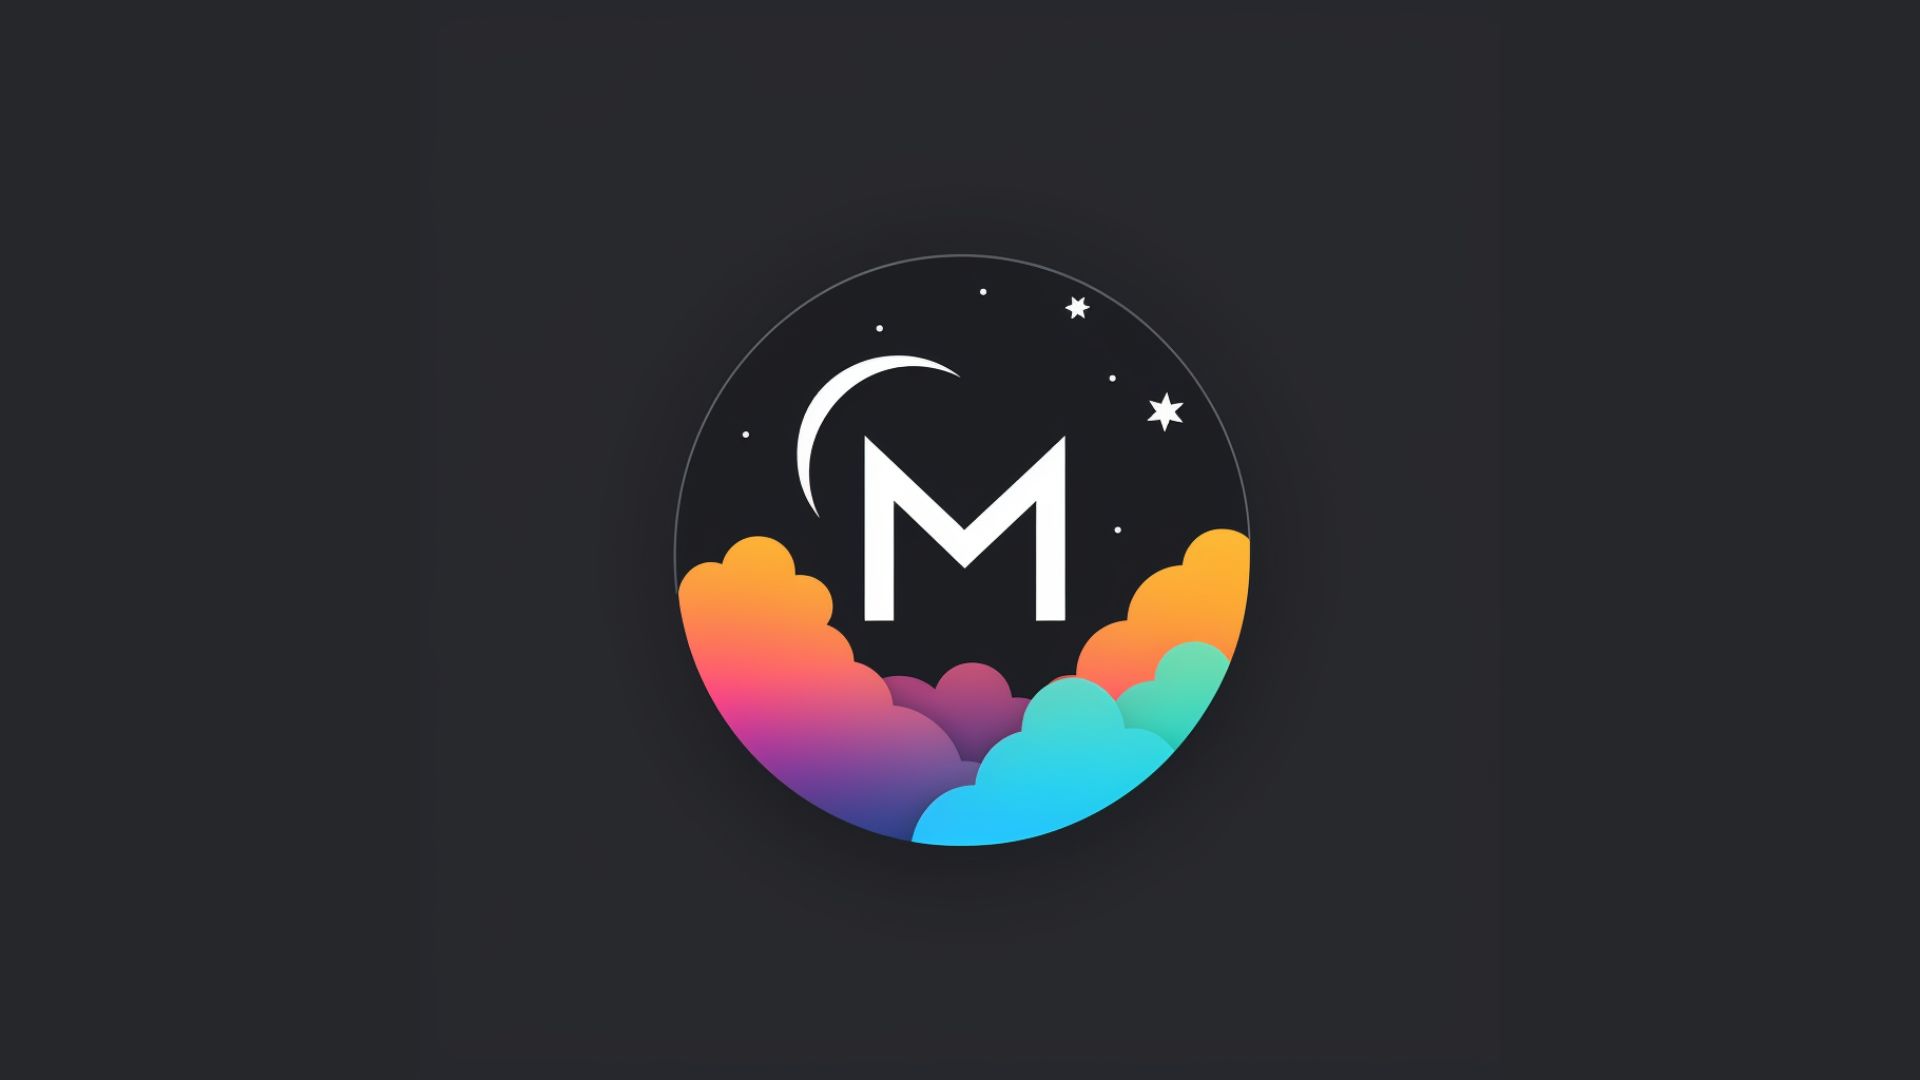 A circular logo with an M in the middle and colorful clouds at the bottom.